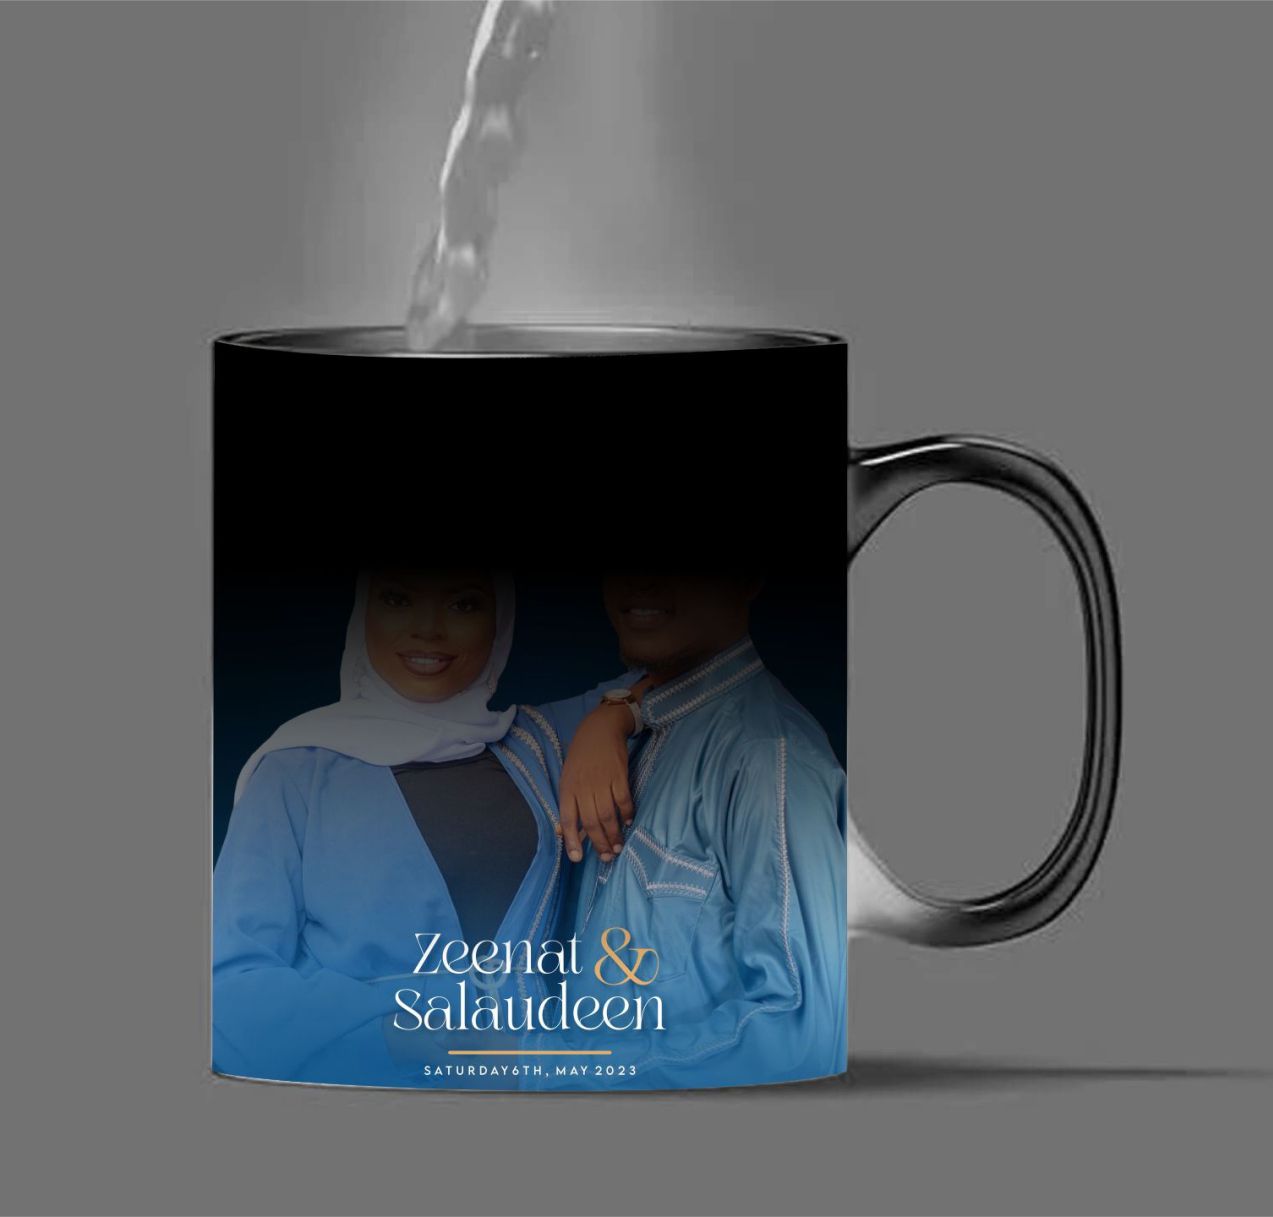 https://pzielng.com/assets/products/magic-mug-best-printing-and-design-in-lagos-nigeria.jpg